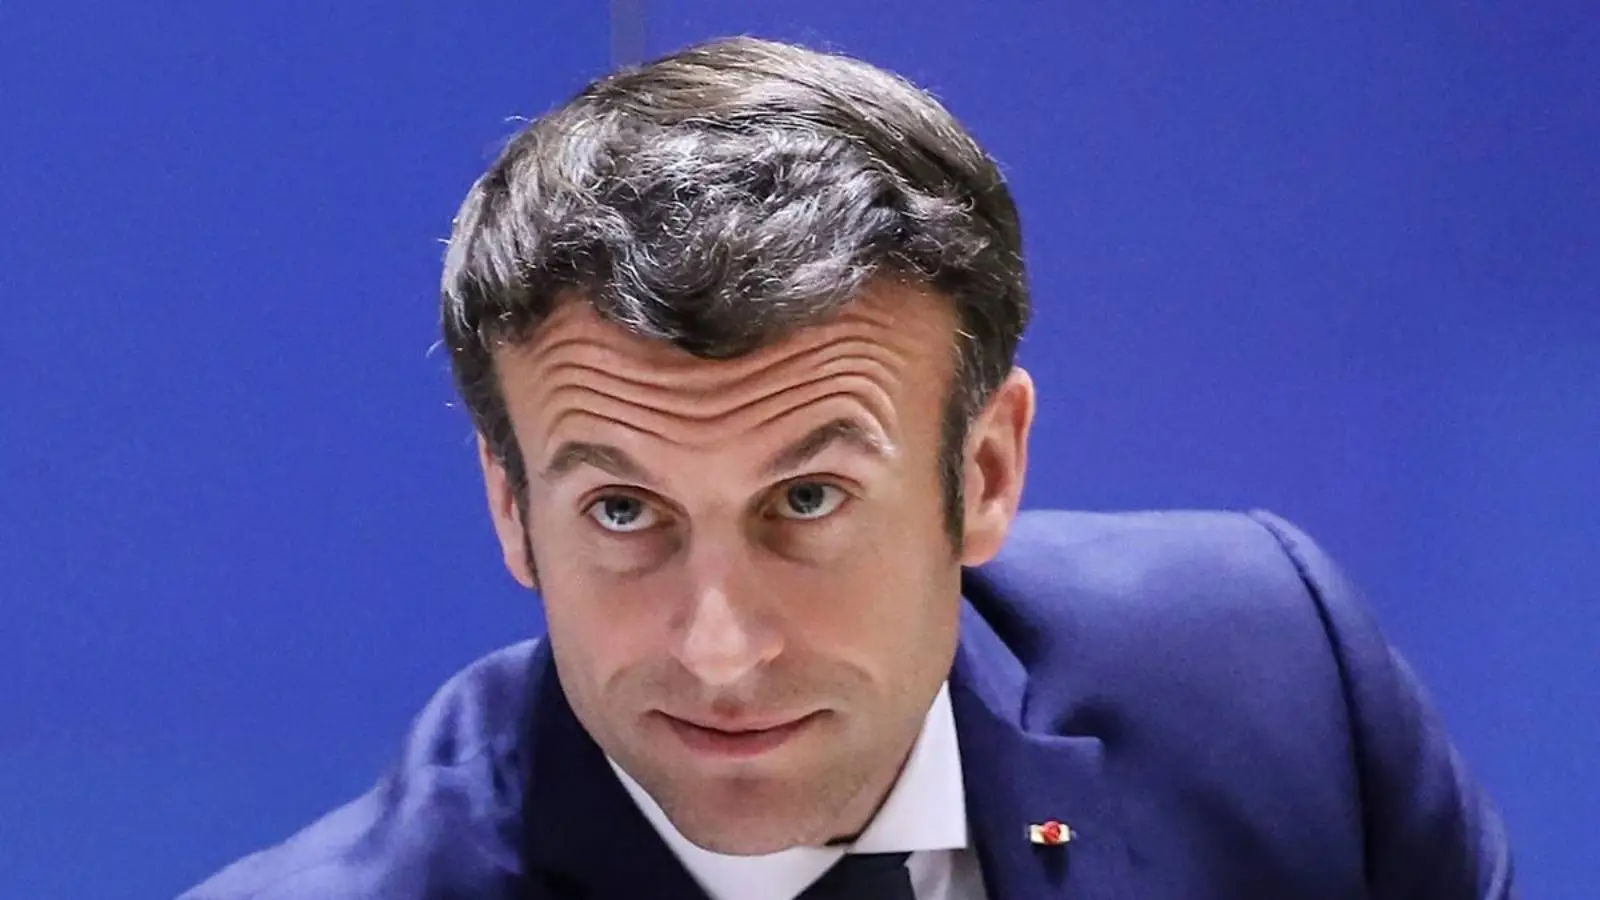 Emmanuel Macron "Swears" that France will SUPPORT Ukraine in the Continuation of the War